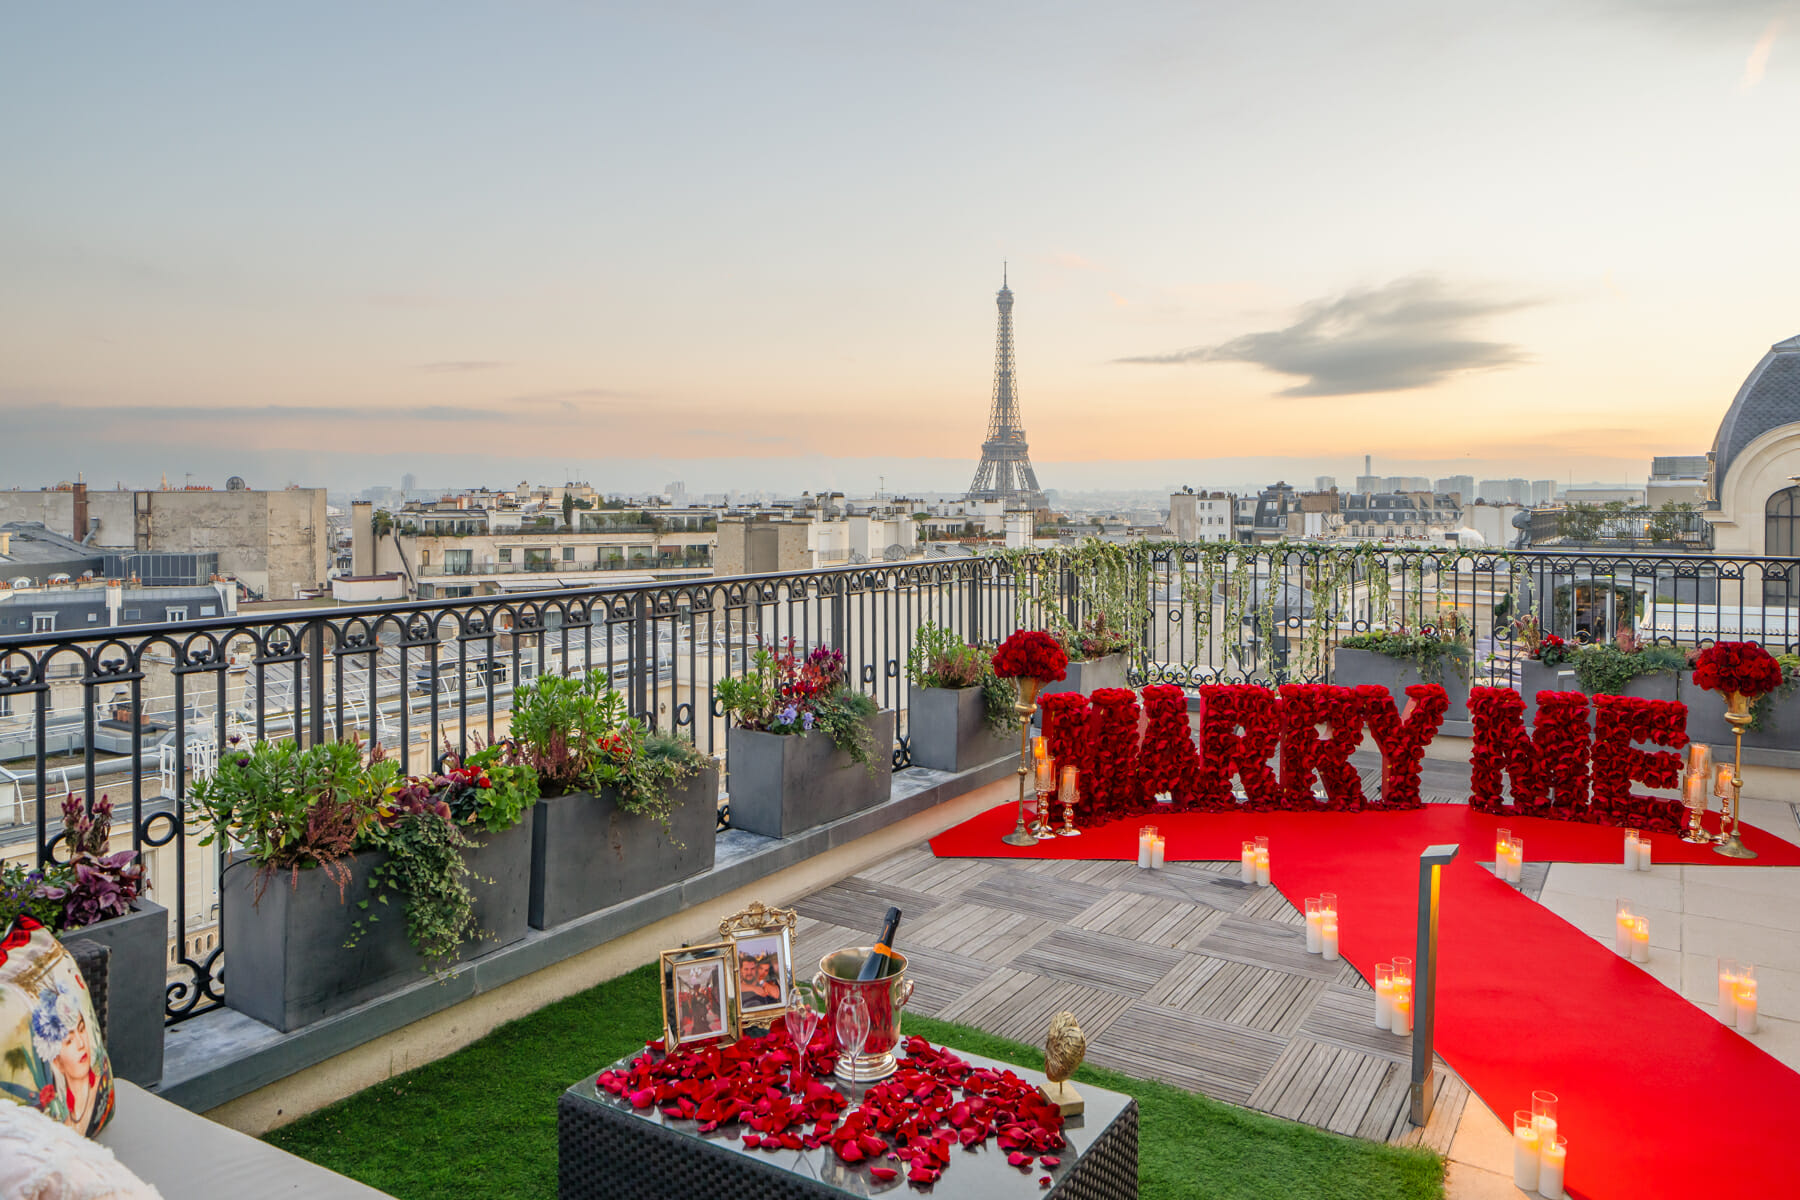 Paris proposal packages: romantic, beautiful, proven, and affordable